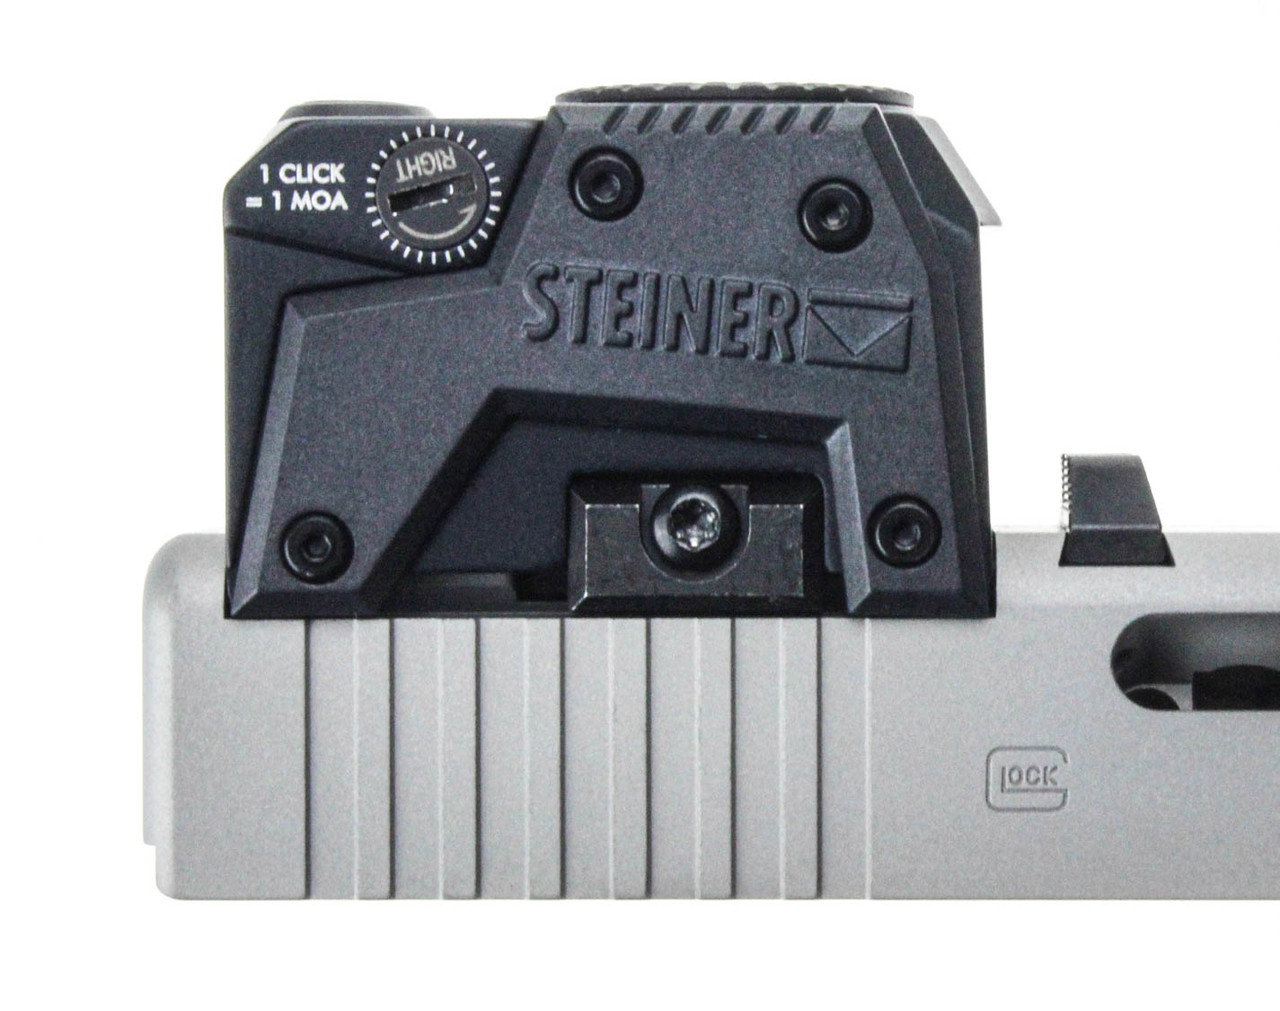 Steiner MPS Optic Cut for Glock